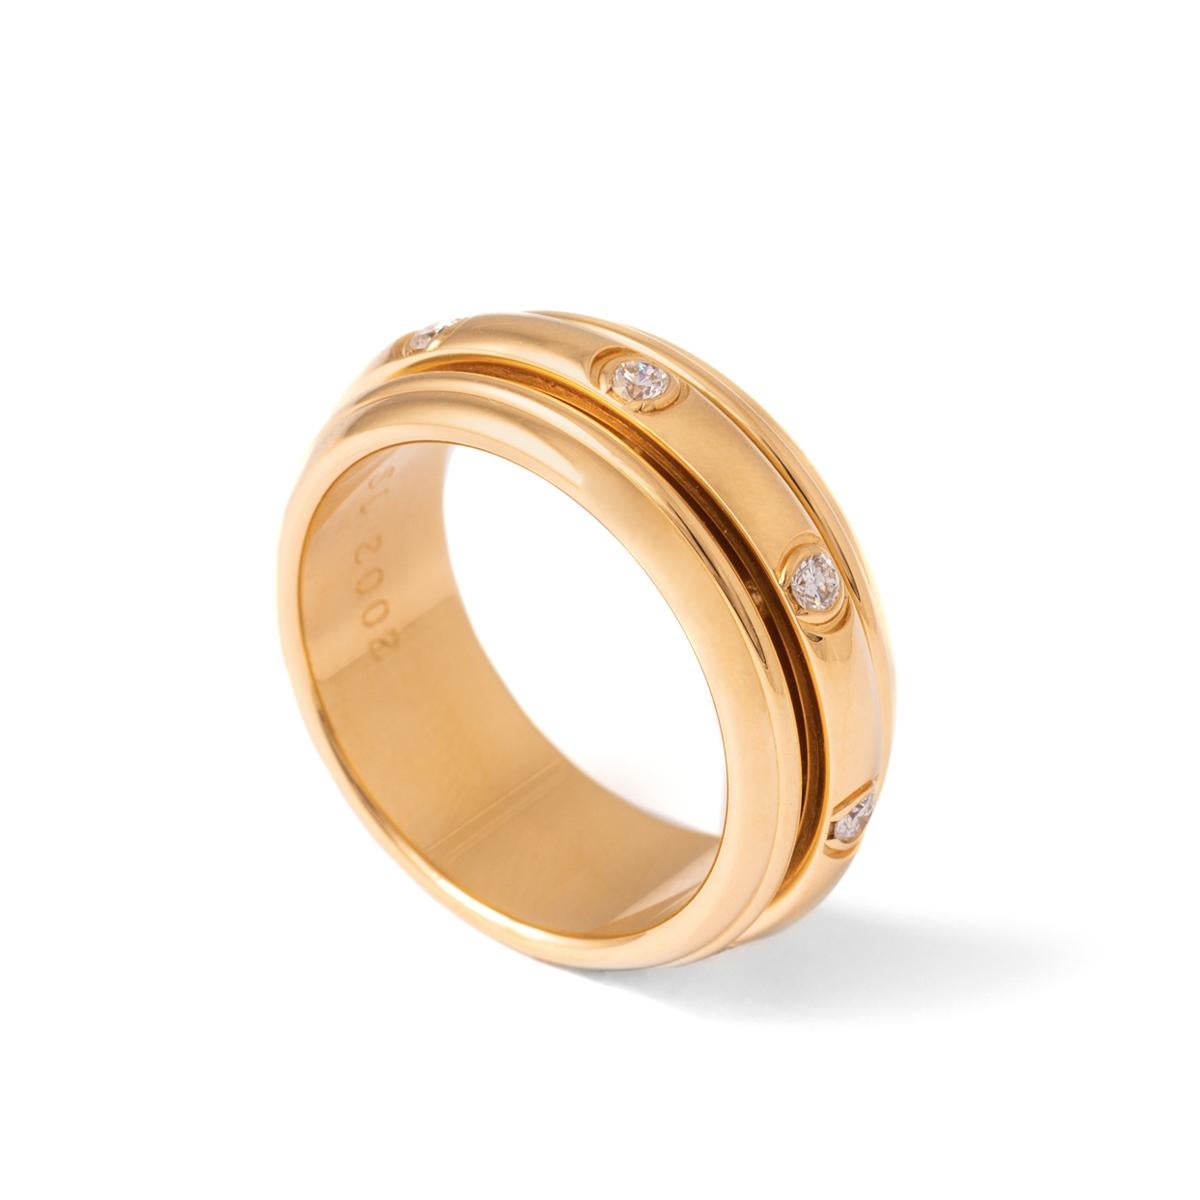 Piaget Possession Diamonds Yellow Gold band Ring.
Numbered A22101.
Signed Piaget.
Date 1991.
Ring size: 60.